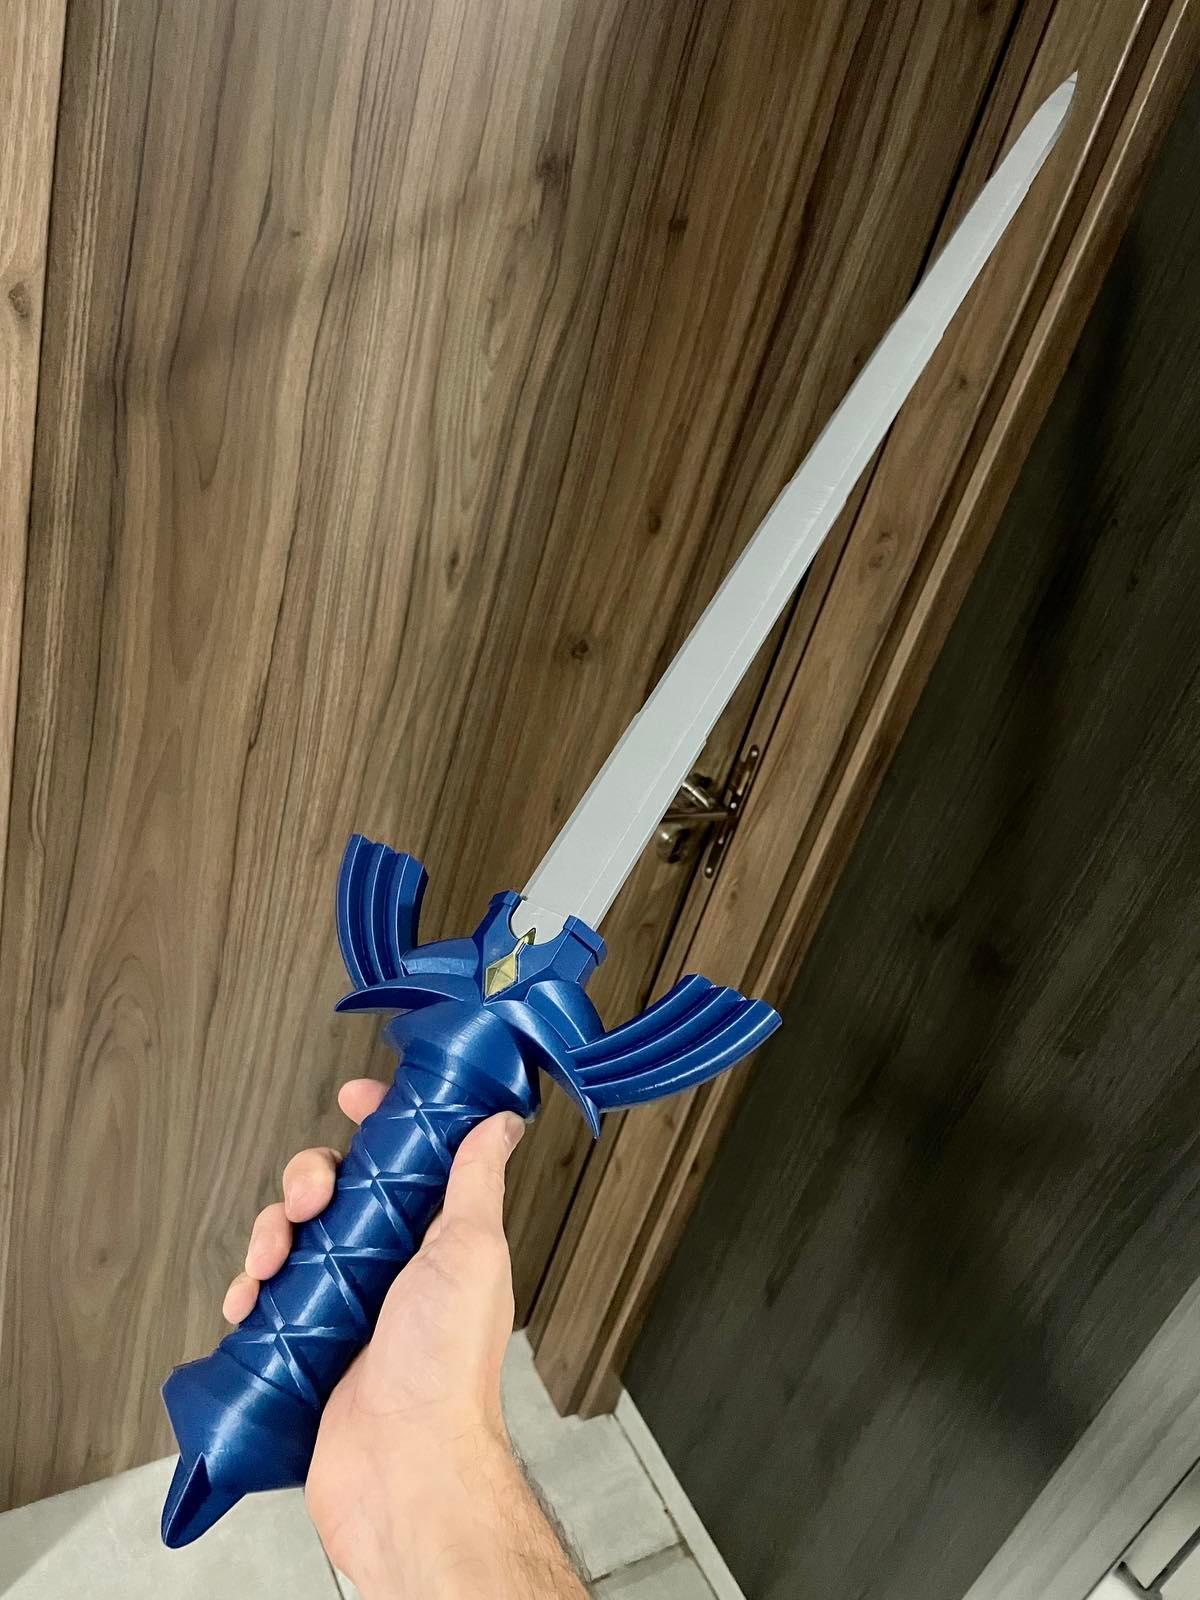 Collapsing Master Sword with Replaceable Blade - Great Design!
I will add this to my page for #Filament February
www.instagram.com/3delusions/ - 3d model